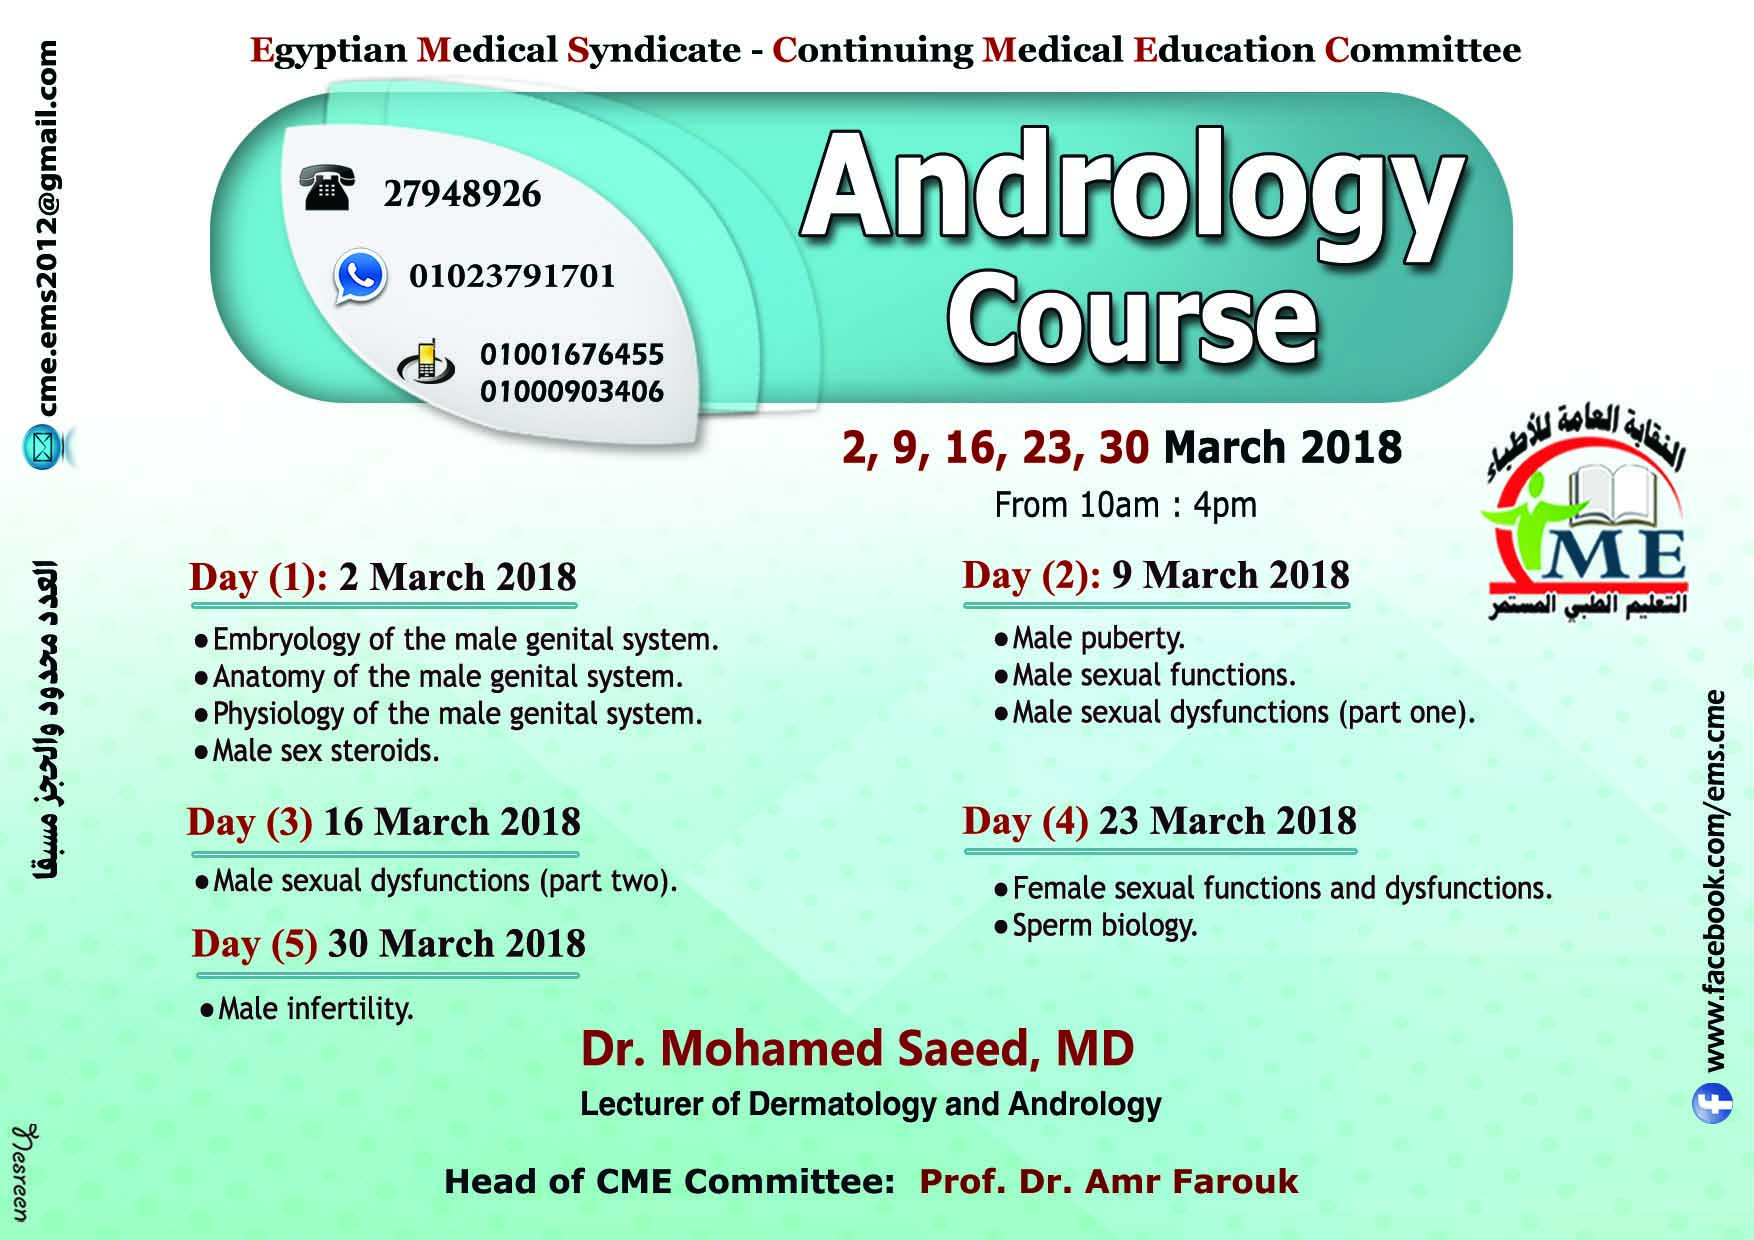 Andrology Course